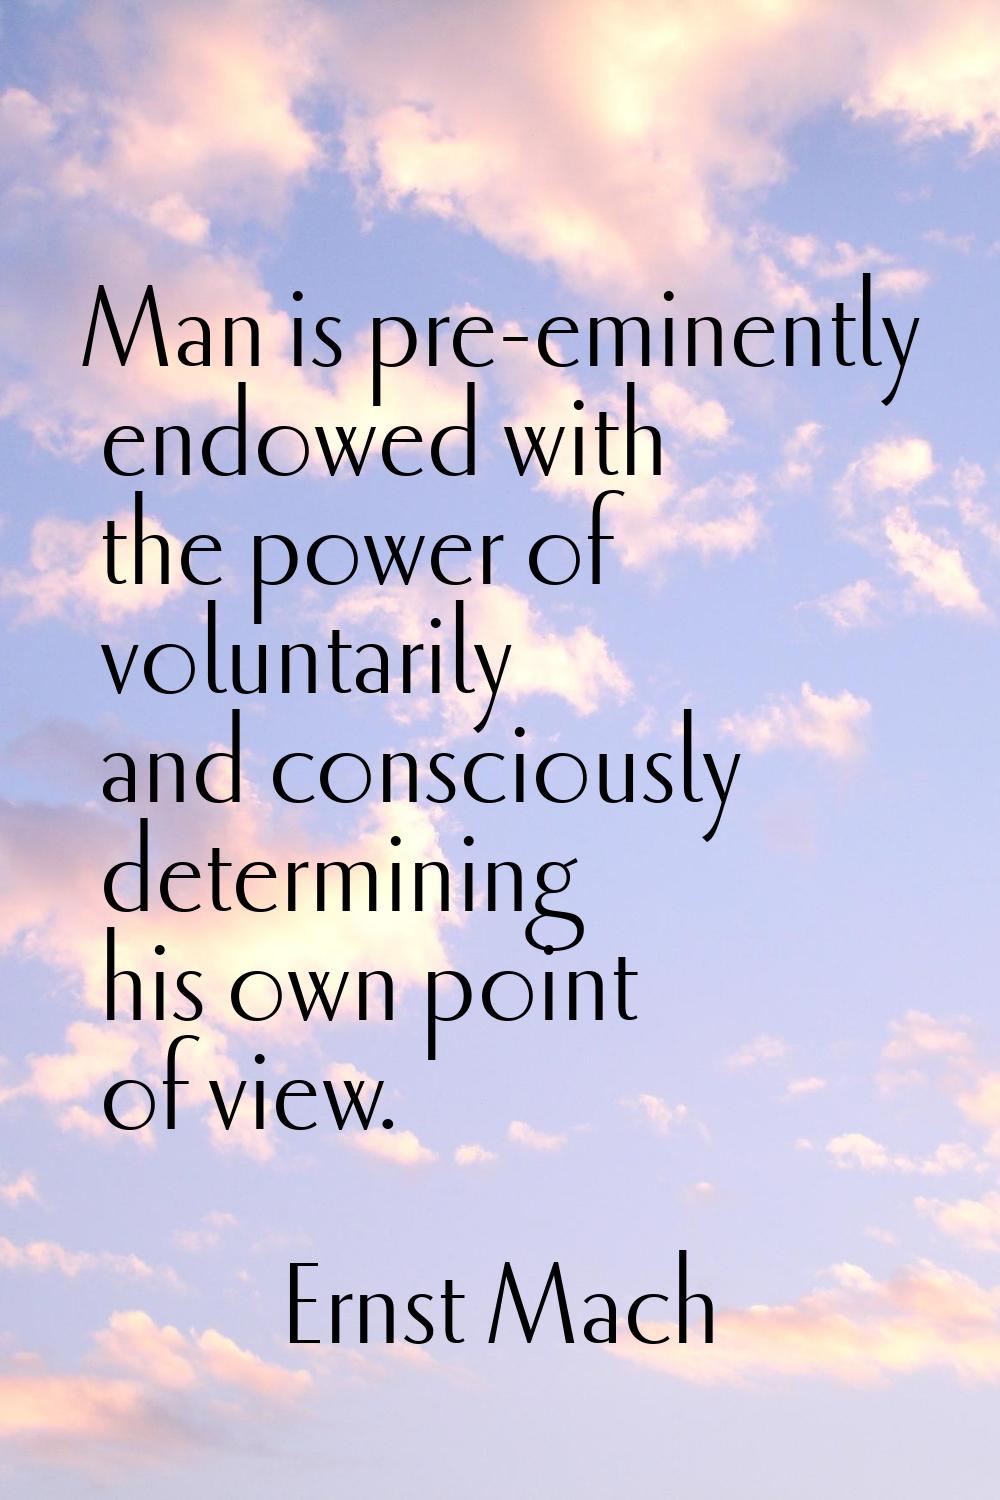 Man is pre-eminently endowed with the power of voluntarily and consciously determining his own poin